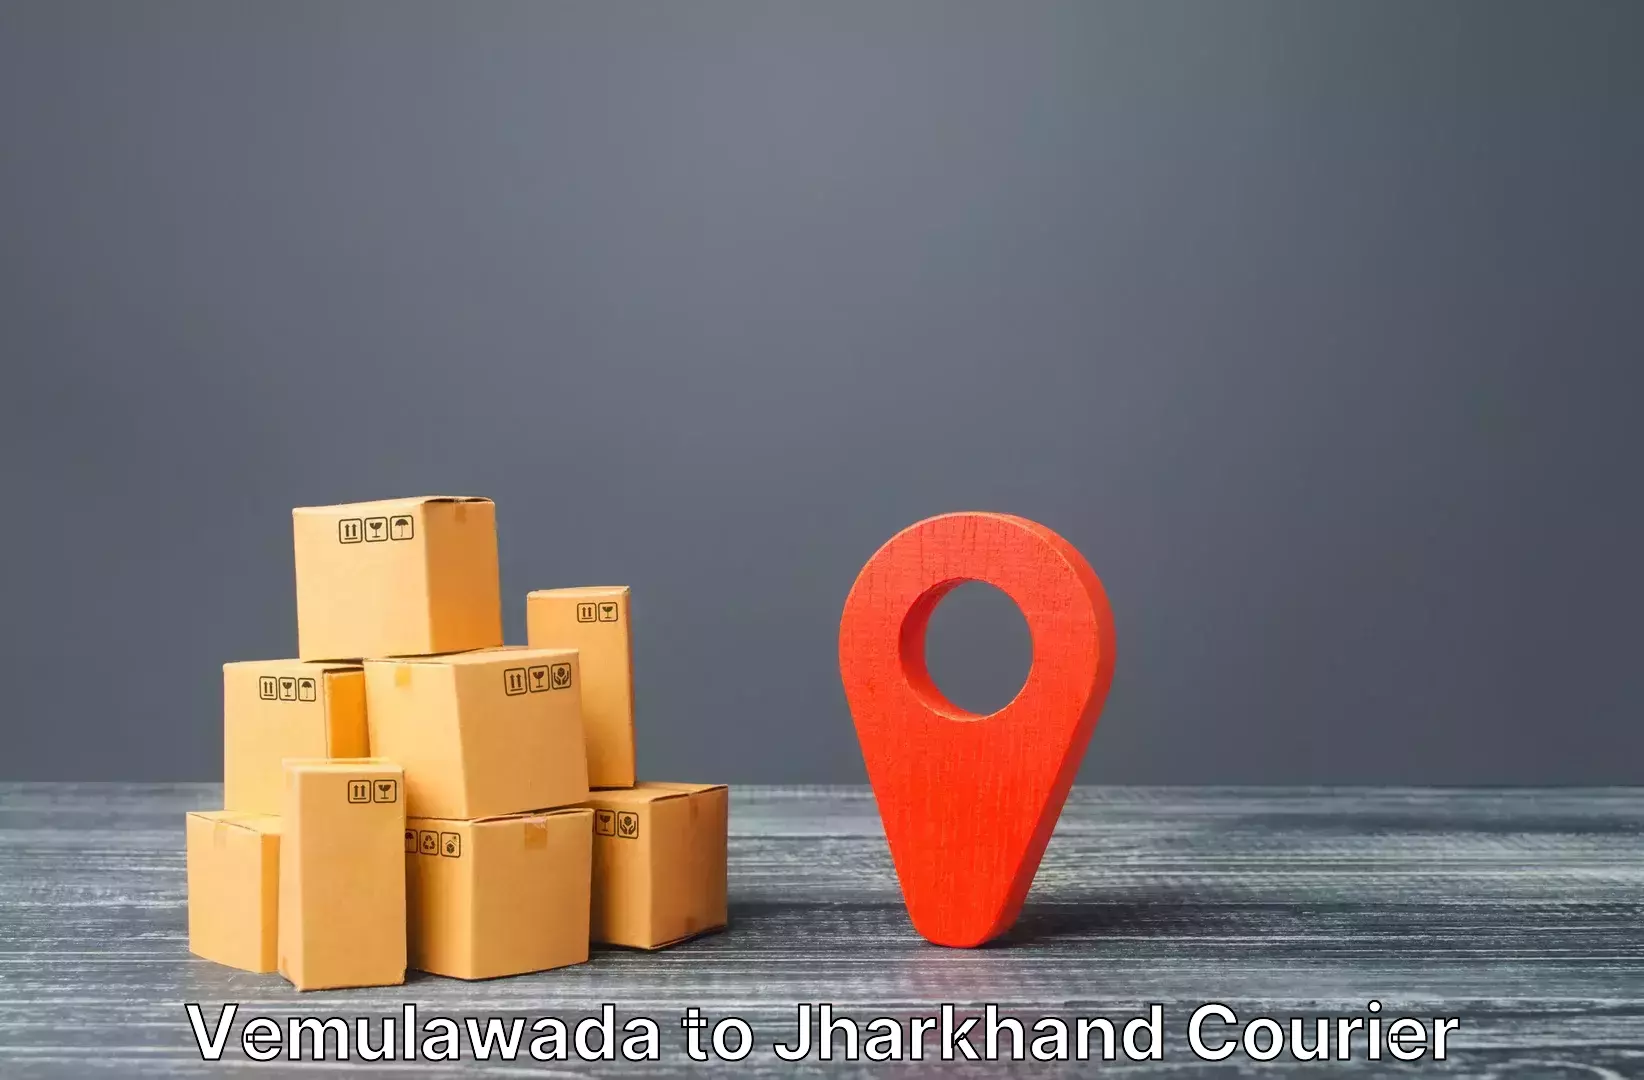 Luggage delivery system Vemulawada to Jharkhand